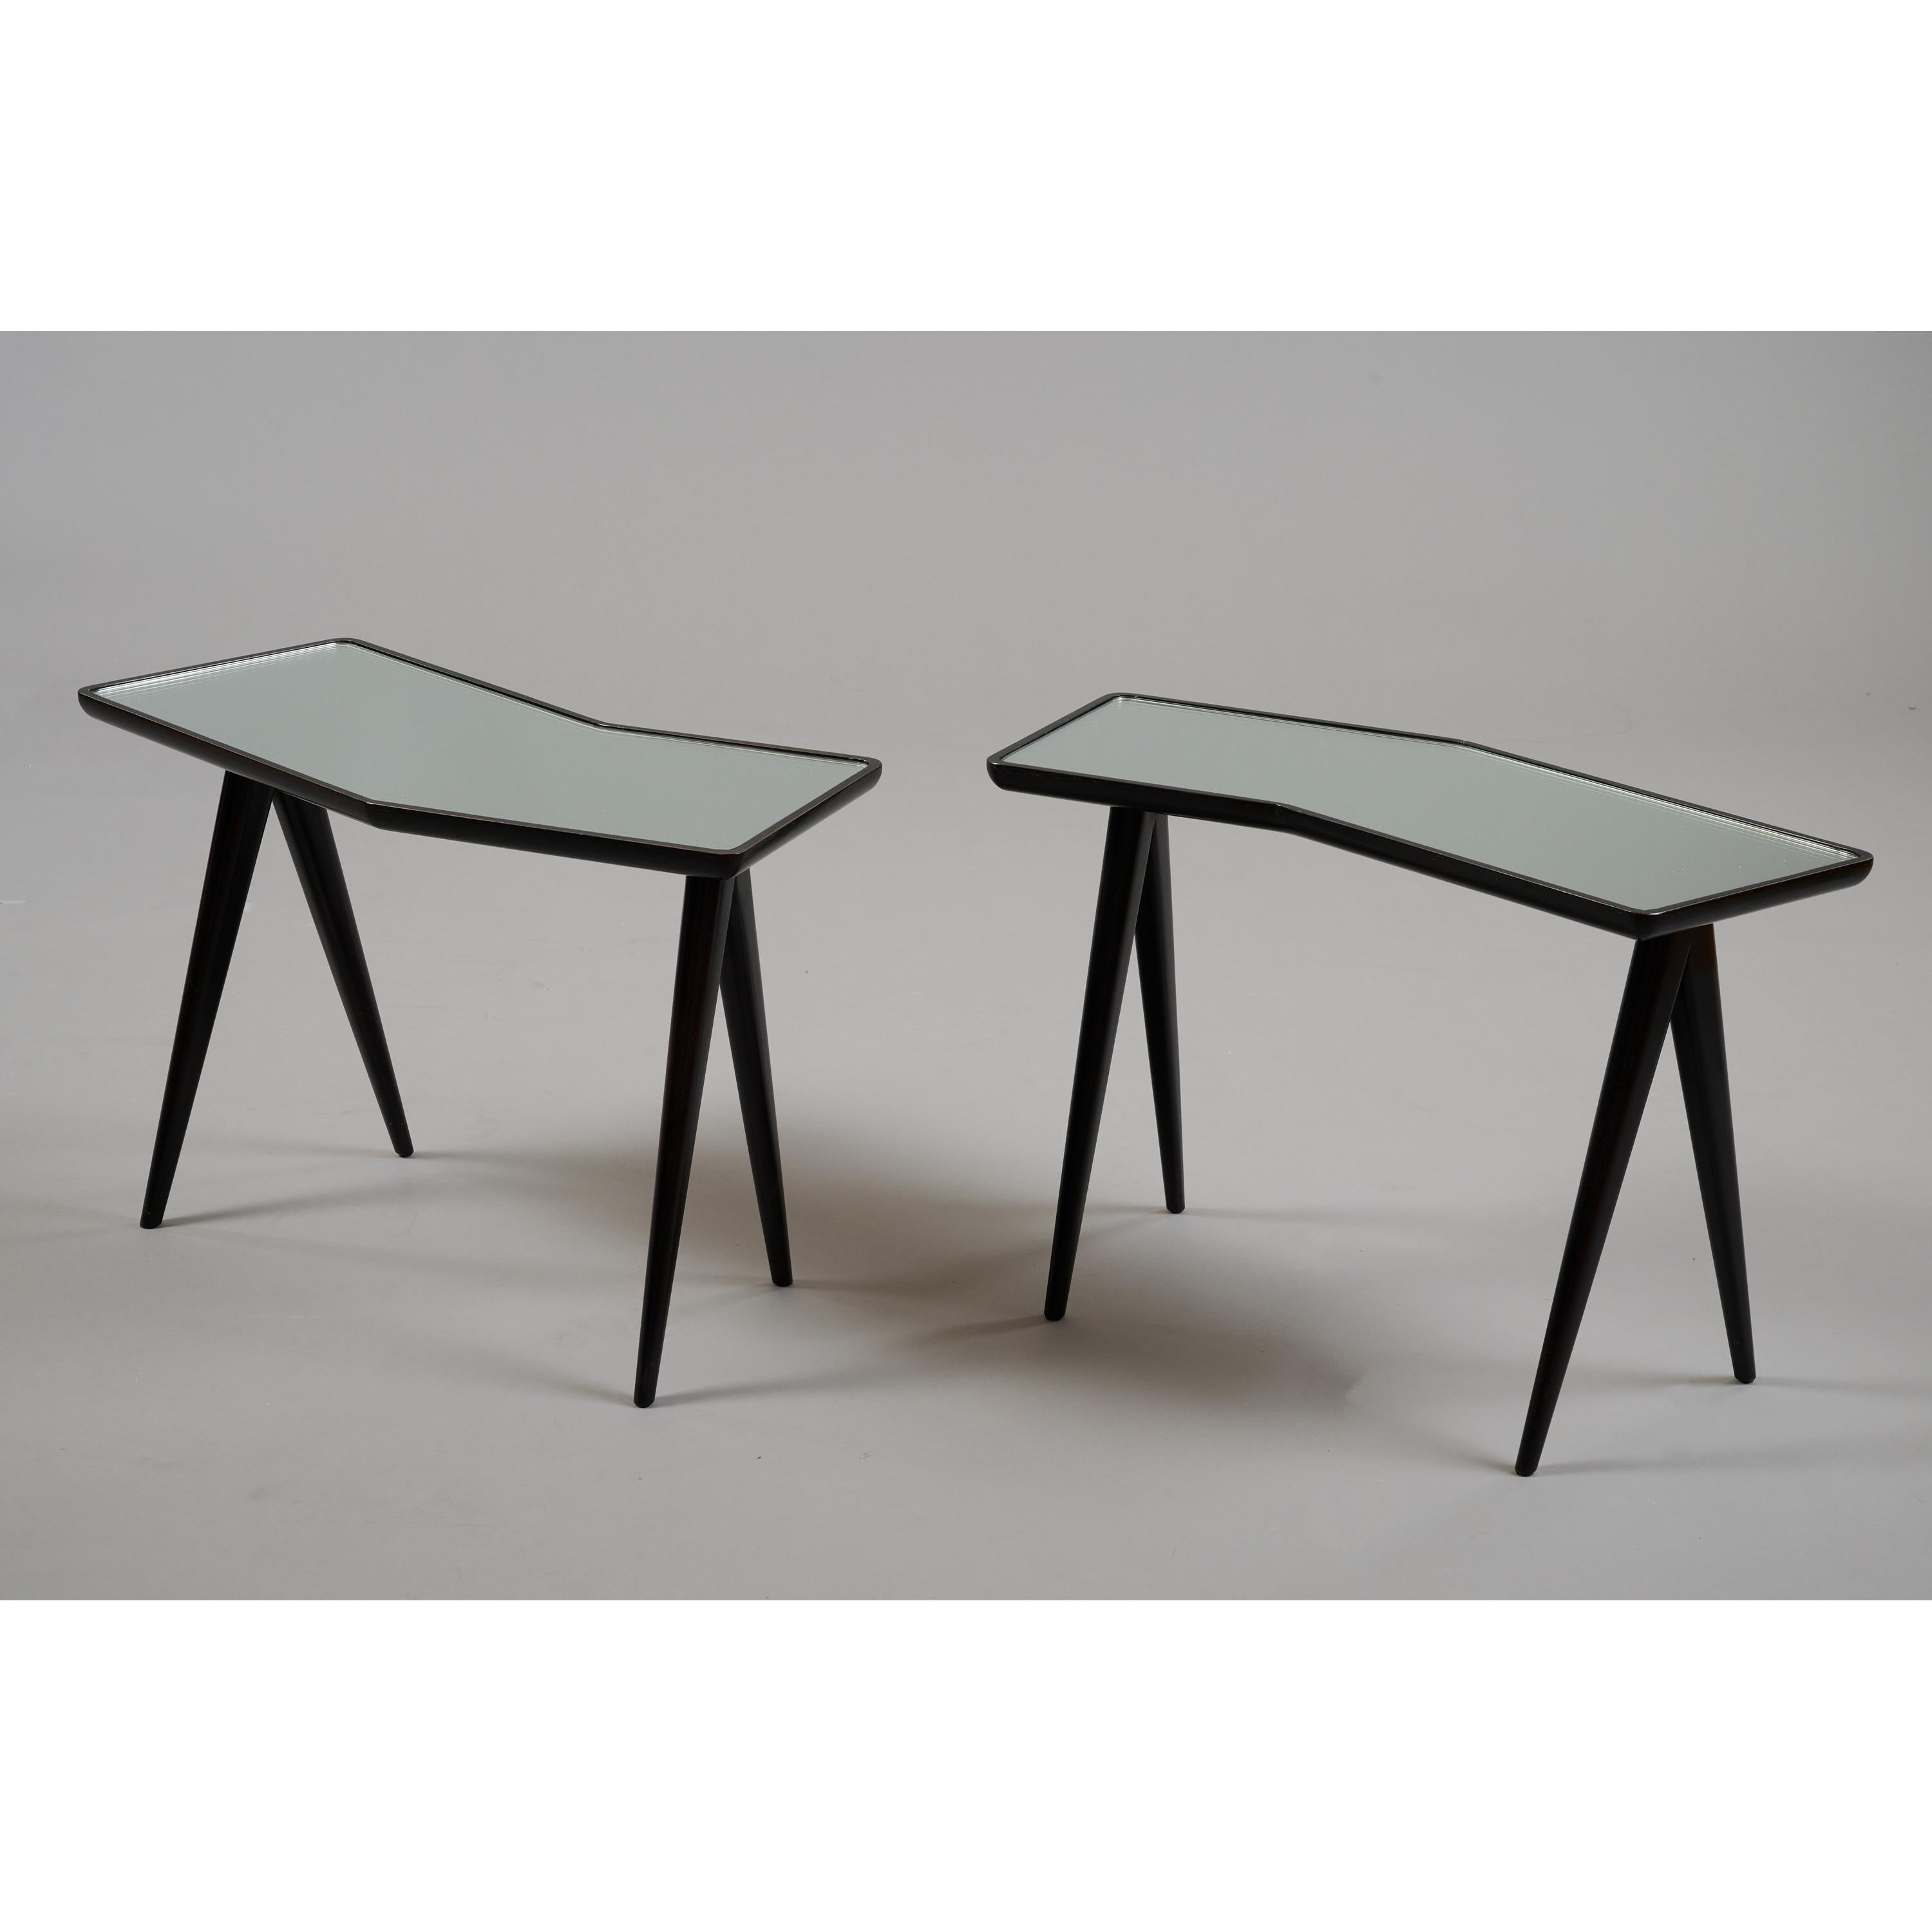 Gio Ponti Pair of Geometric Nesting Tables with Mirrored Tops, Italy, 1950's For Sale 3